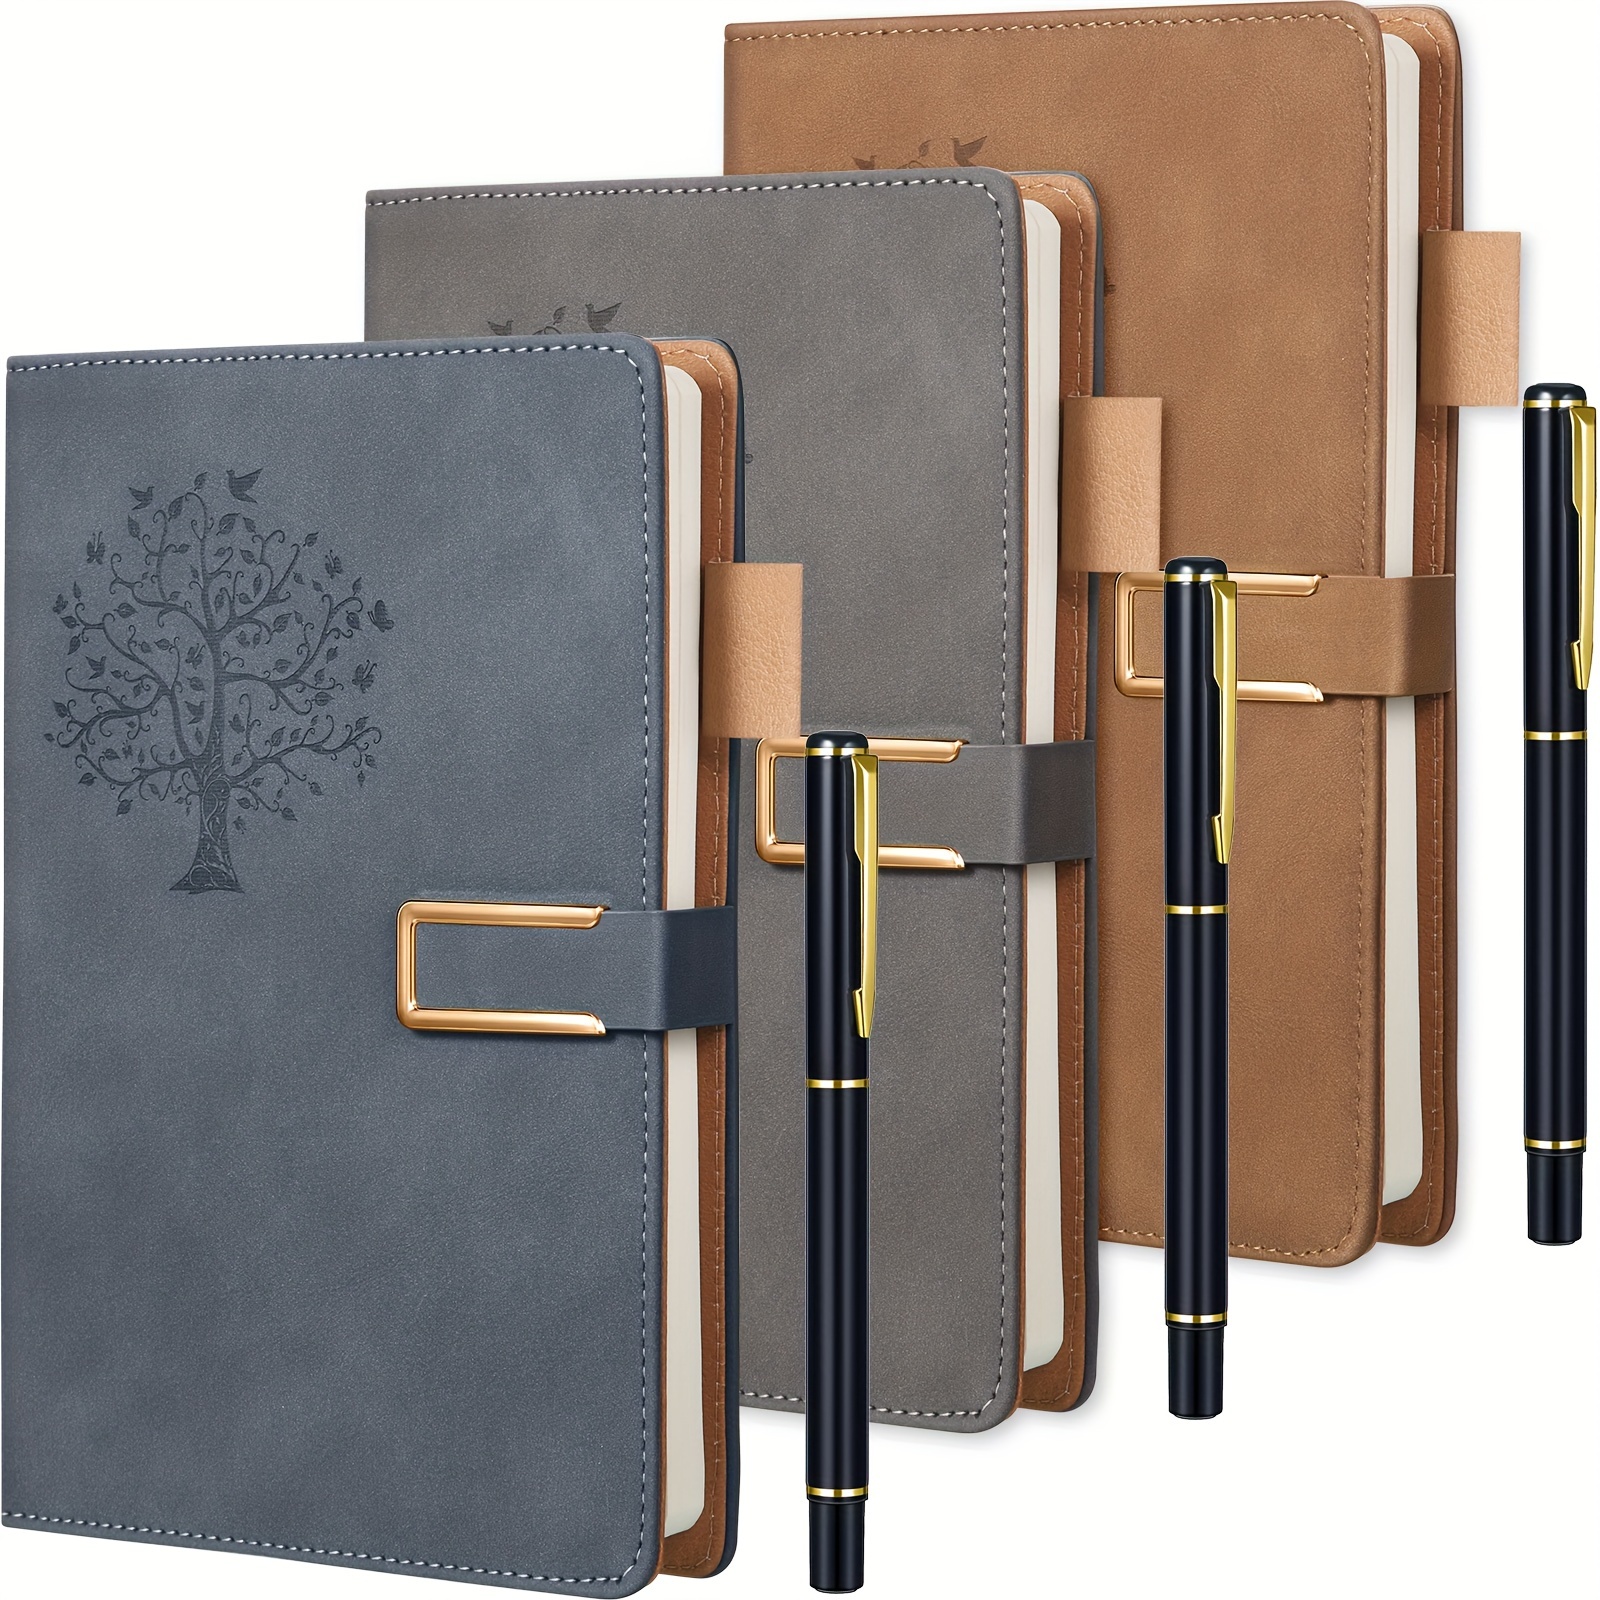 

3 Pcs Leather Journal Notebooks With Pen Tree Writing Journal Personal Journal For Women Men Travel Christmas Diary Gift A5 Magnetic Faux Hardcover Notebook 200 Lined Pages (simple)